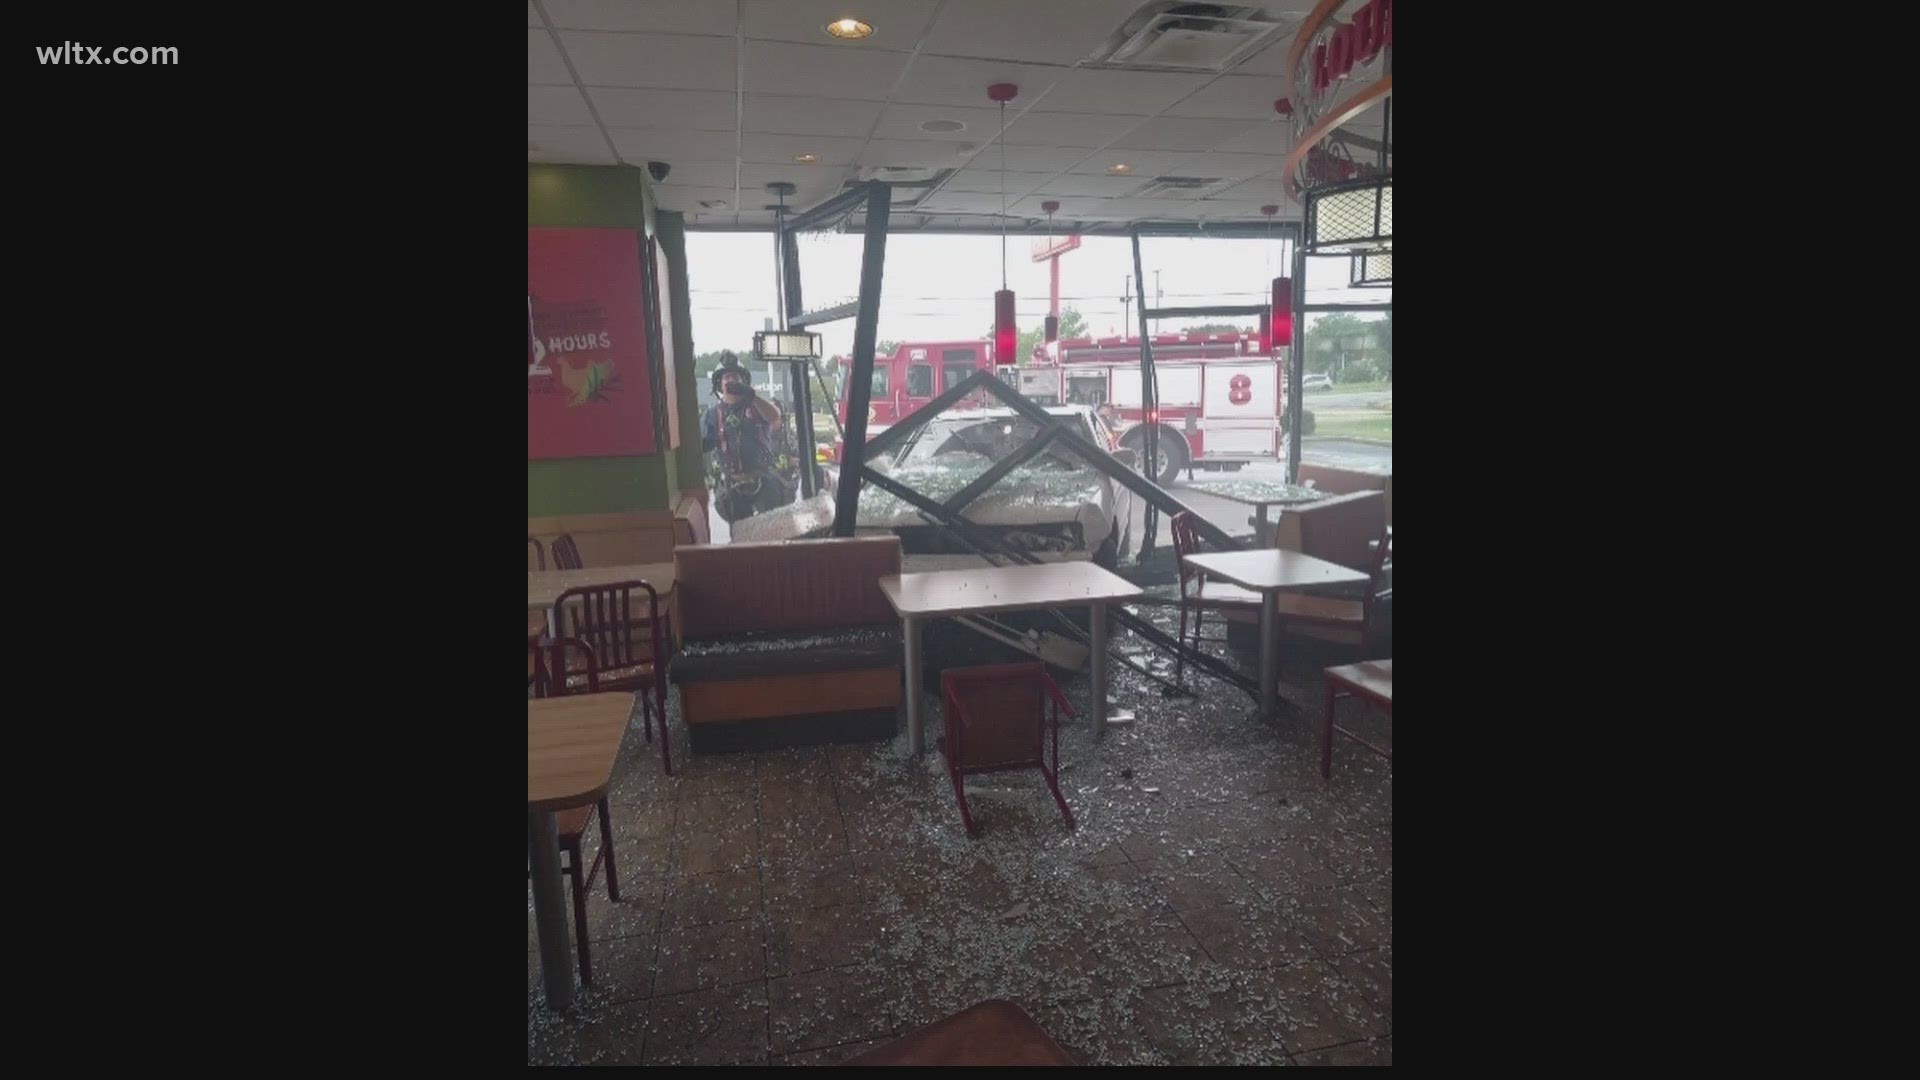 Around 5pm this afternoon a car crashed into the Popeyes on Garners Ferry road.   No word on injuries yet.